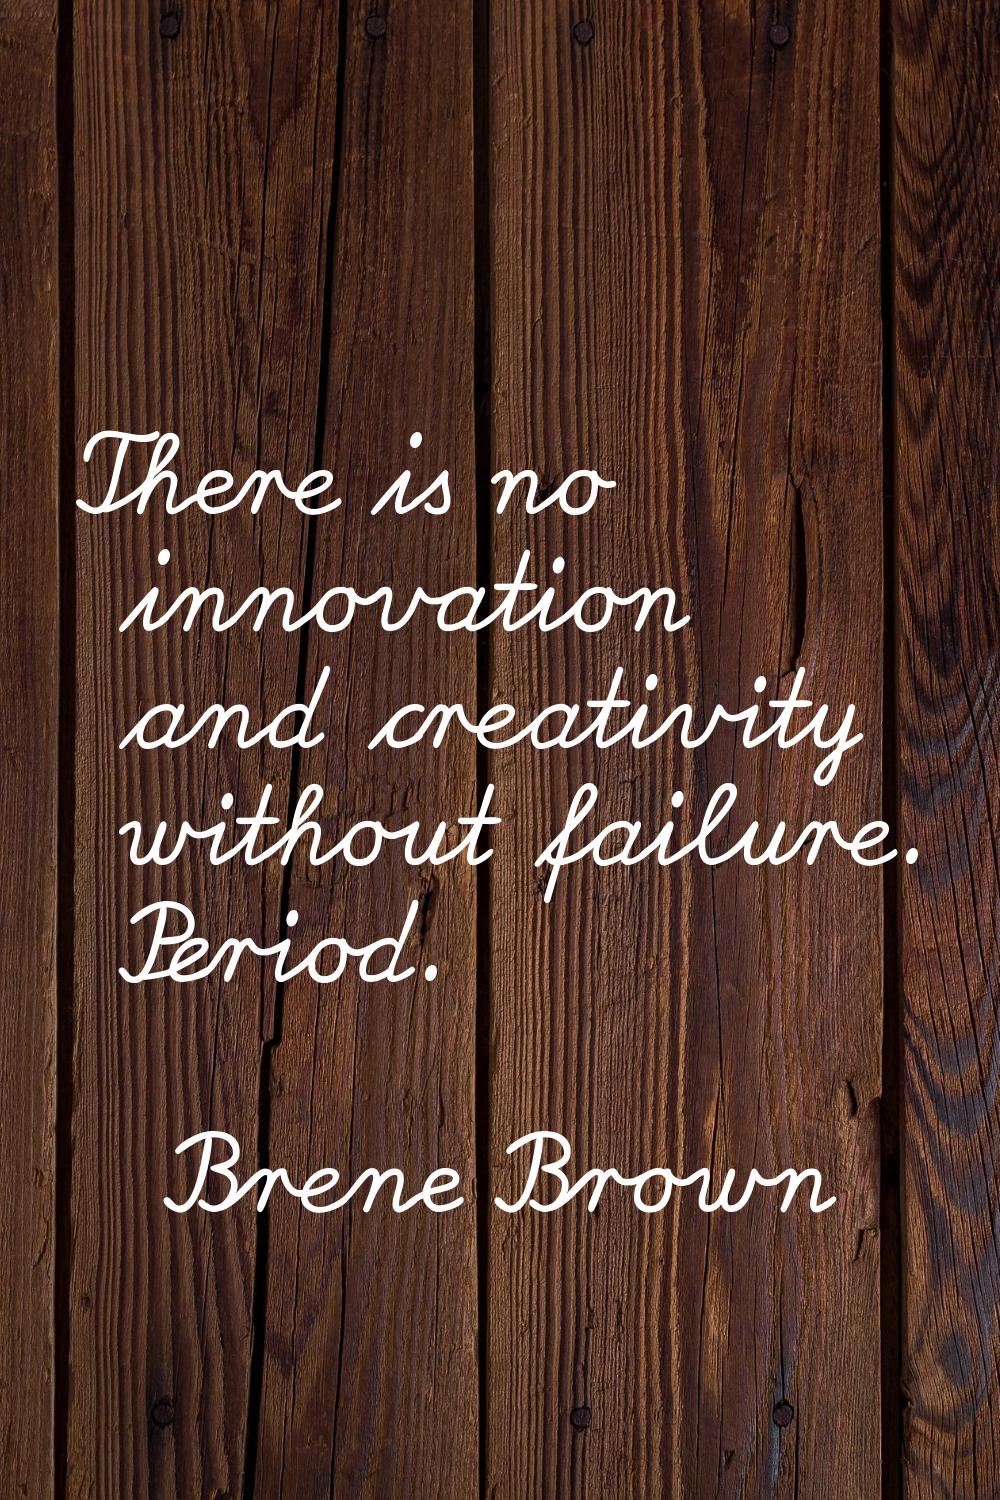 There is no innovation and creativity without failure. Period.